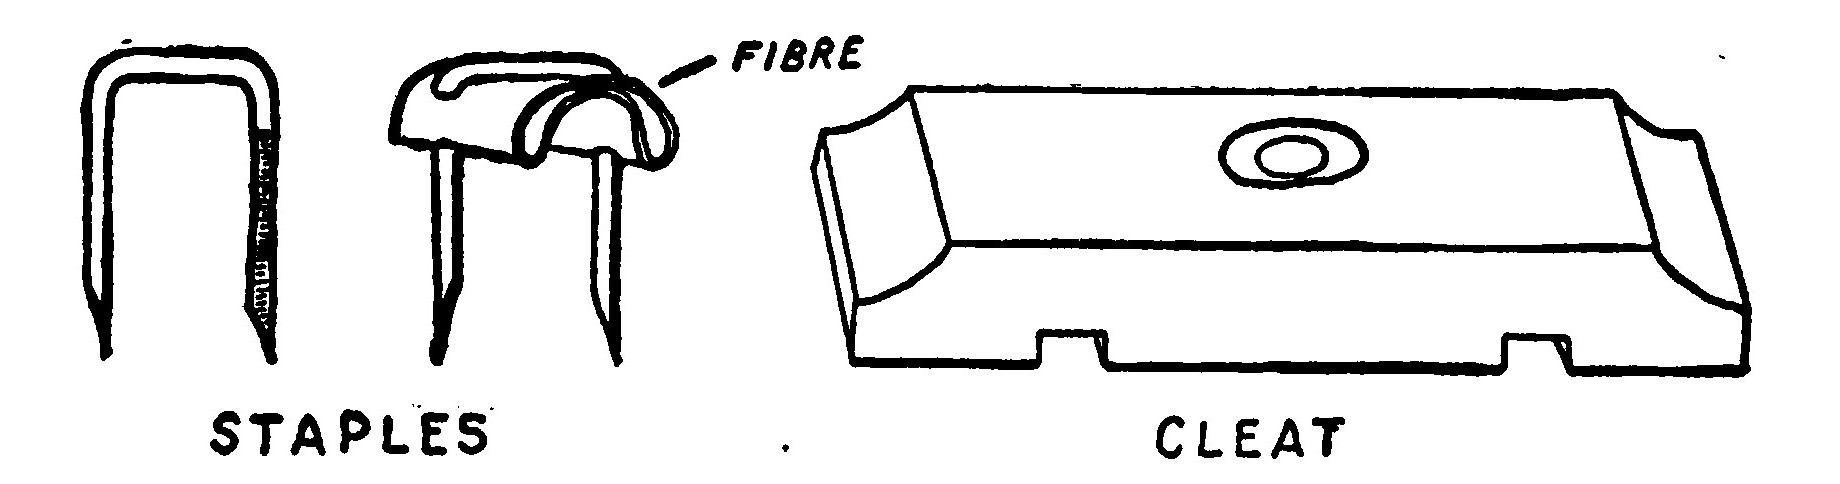 Fig. 89.—Staples and Wooden Cleat used for running Low Voltage Wires.